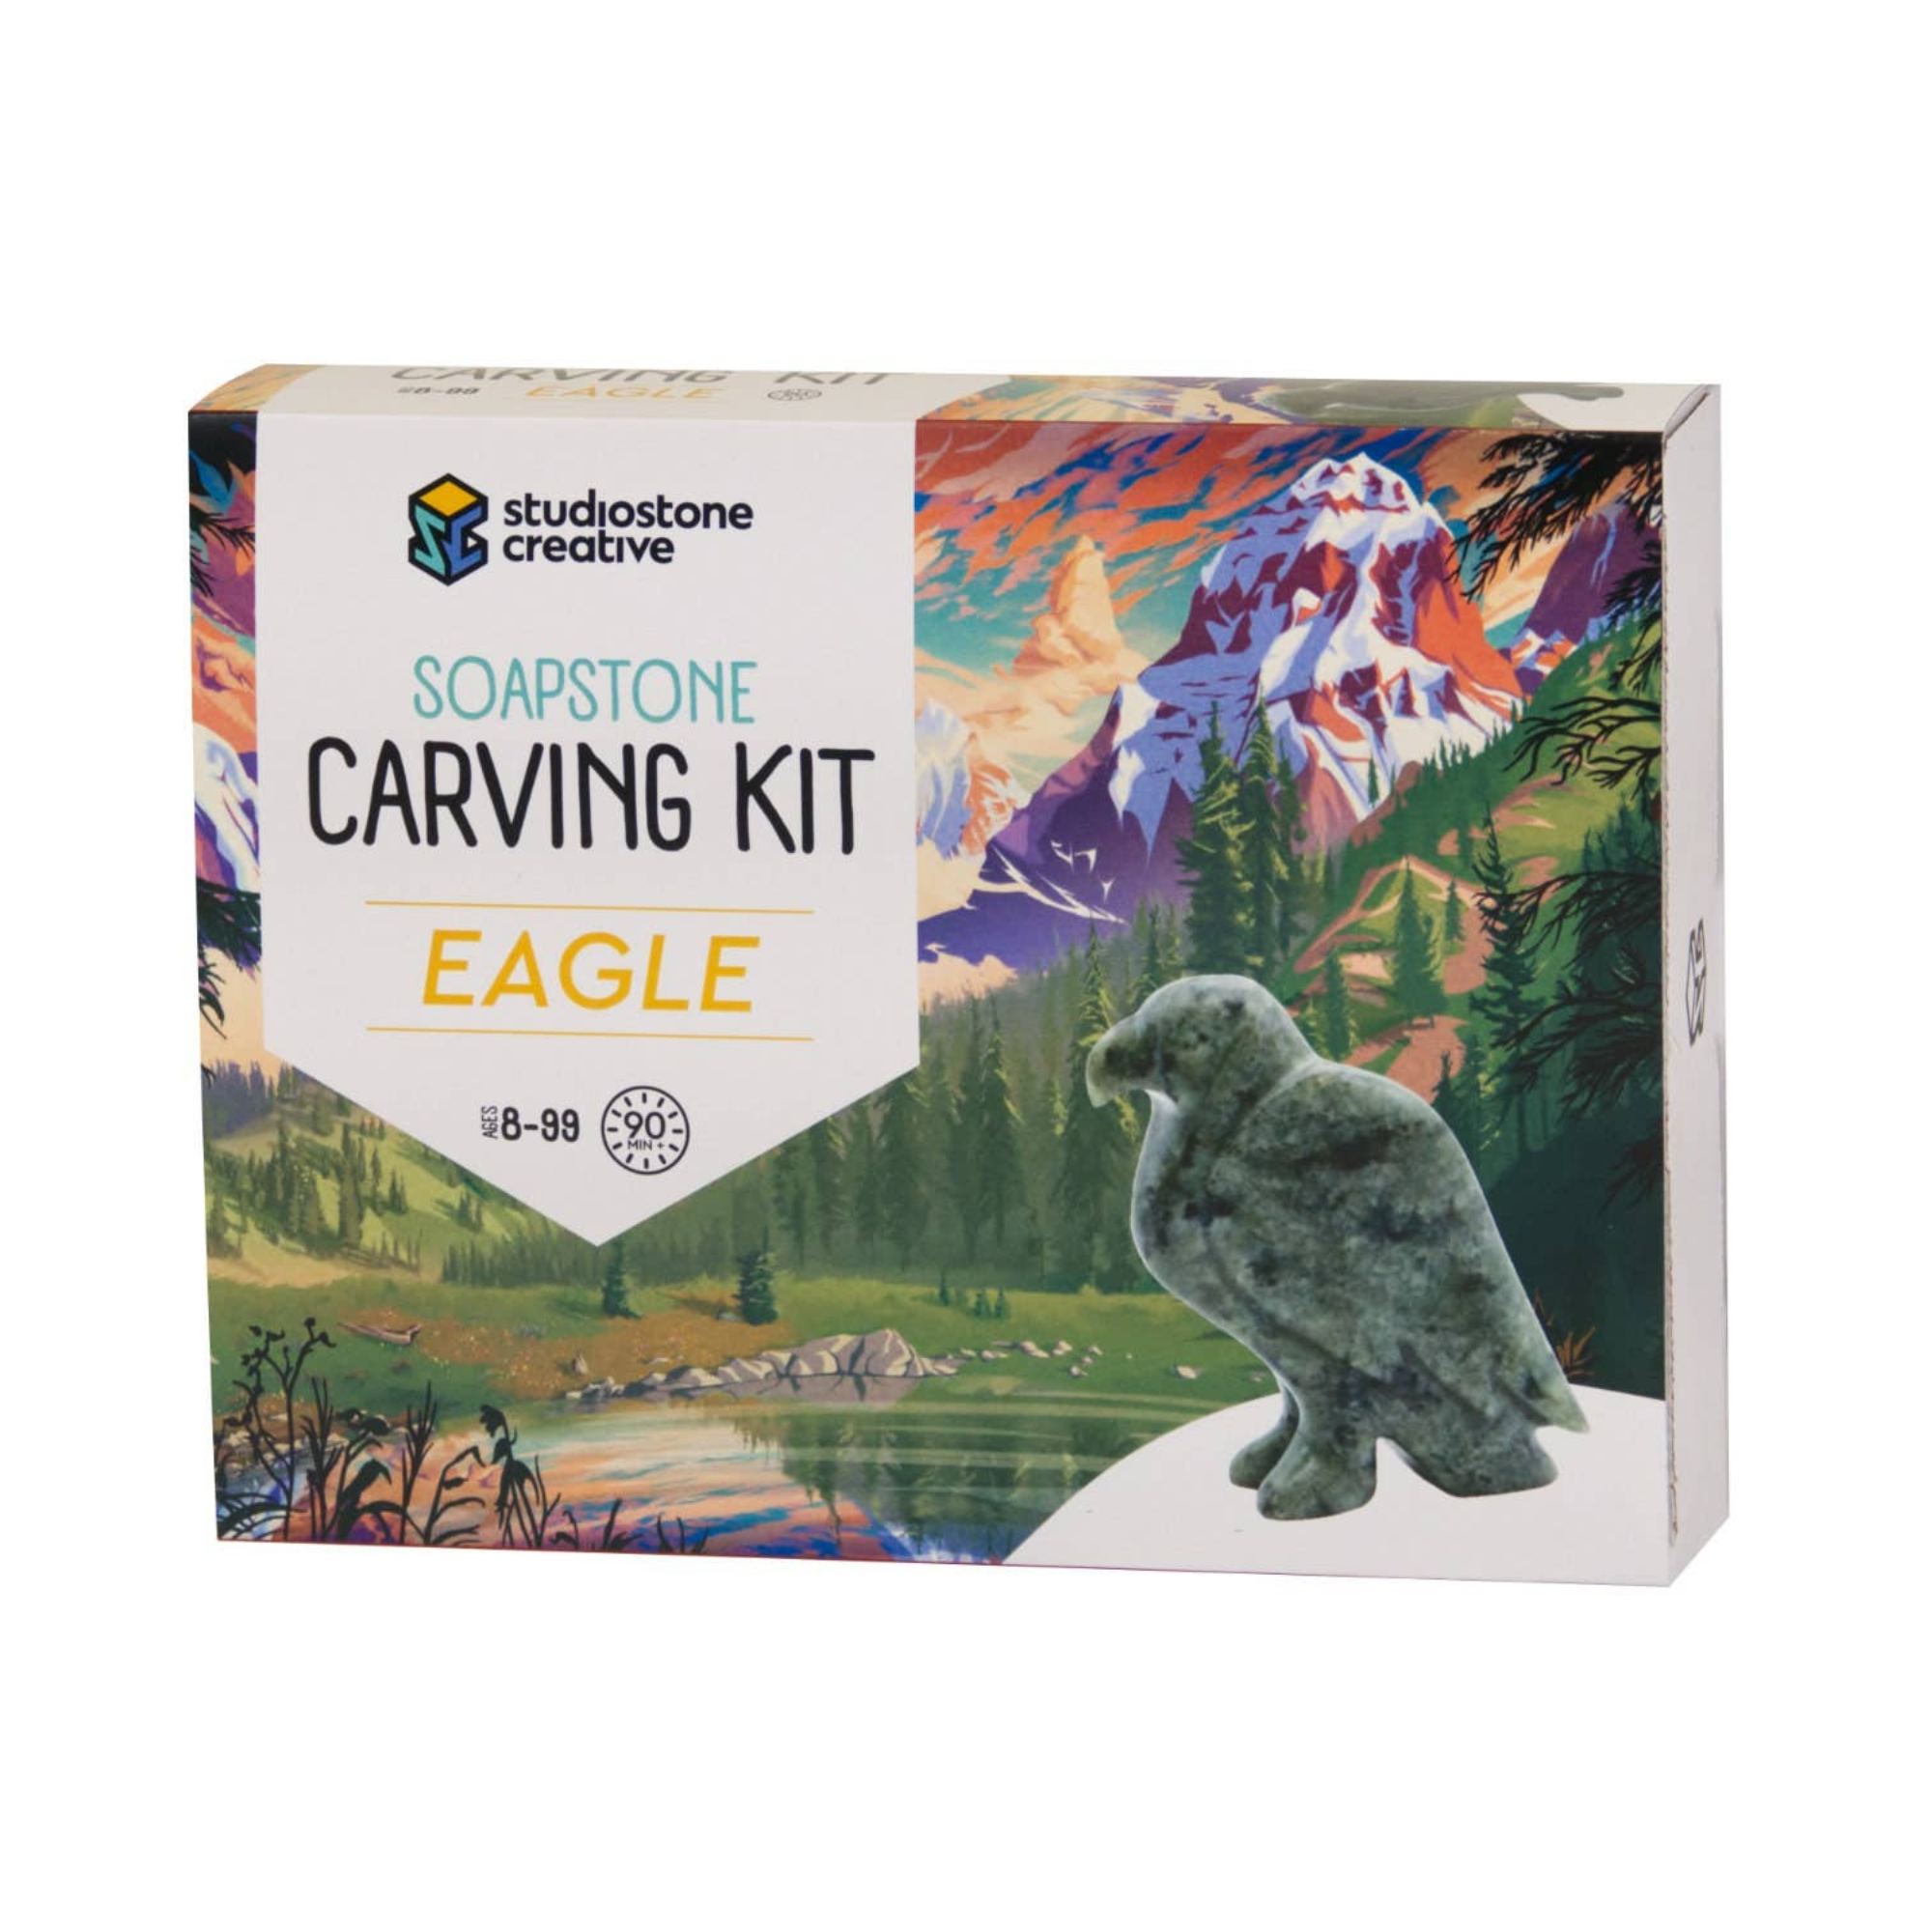 Eagle Soapstone Carving and Whittling—DIY Arts and Craft Kit. All Kid-Safe Tools and Materials Included. For kids and adults 8 to 99+ Years.